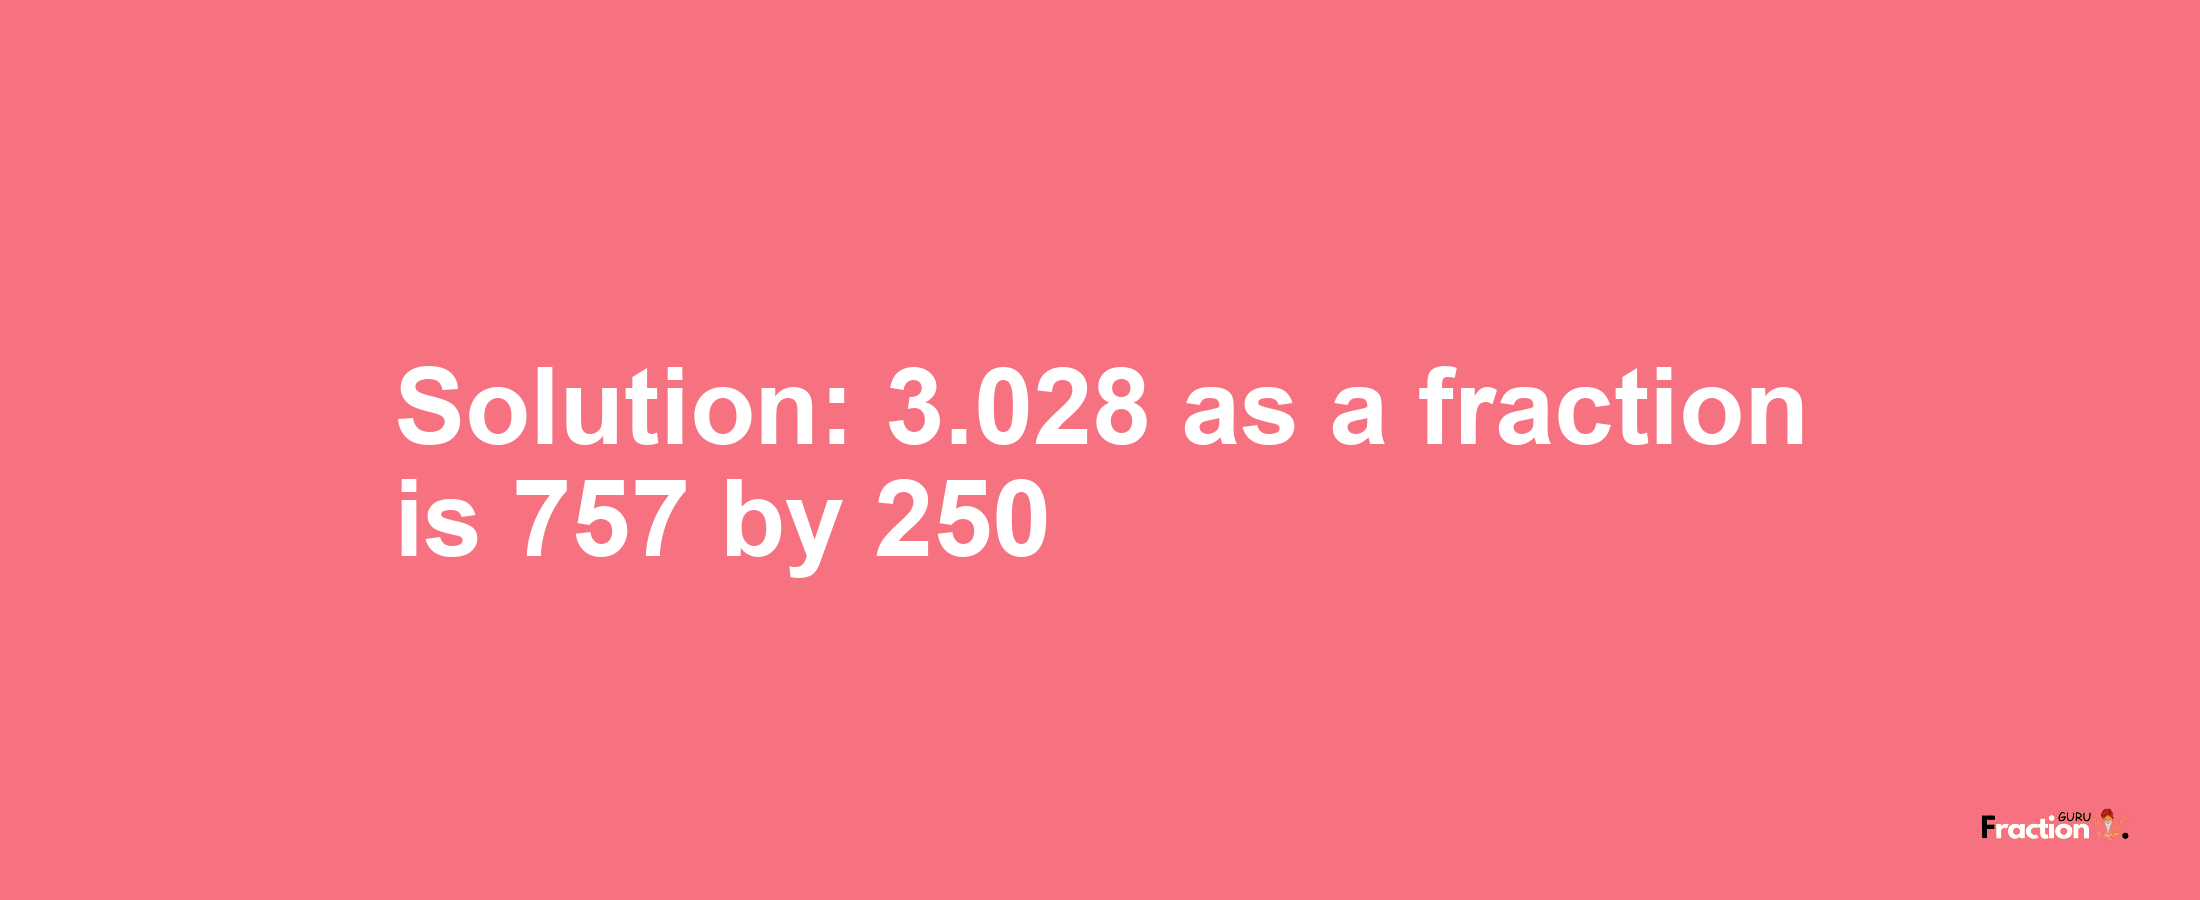 Solution:3.028 as a fraction is 757/250